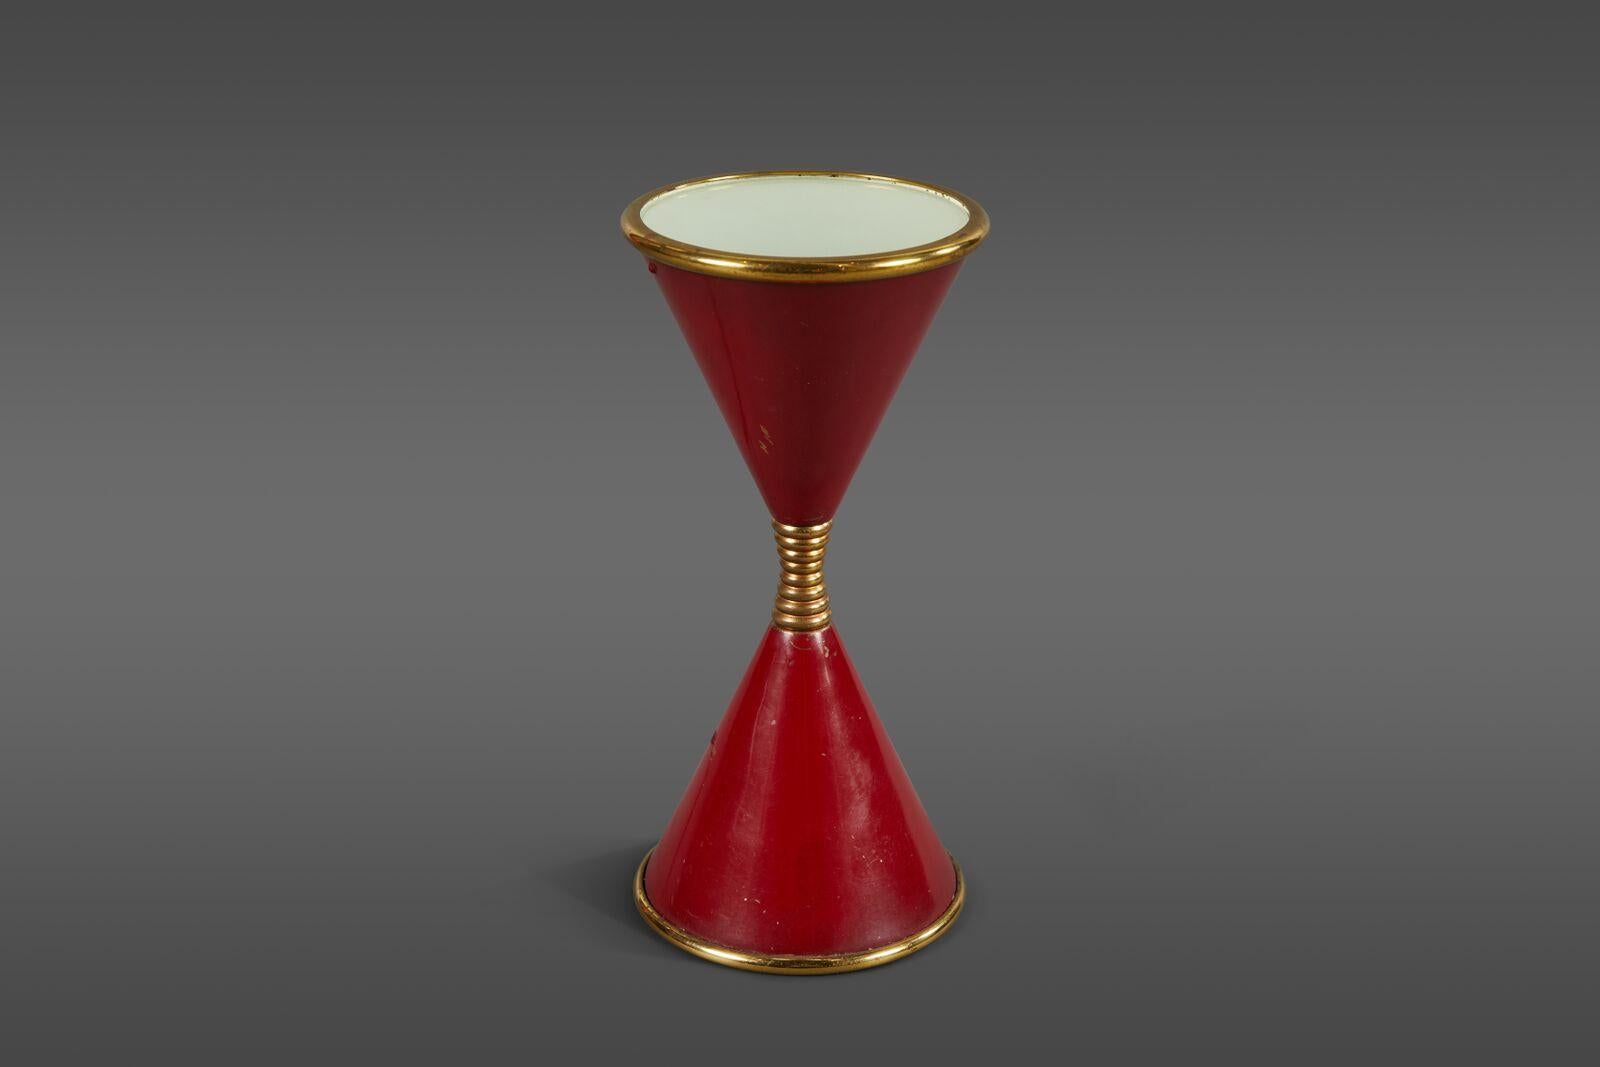 A small Angelo Lelii “Clessidra” table lamp, for Arredoluce, in red lacquered metal with brass details and a frosted glass lens. The lamp has exceptional age and character. Original switch and wiring.